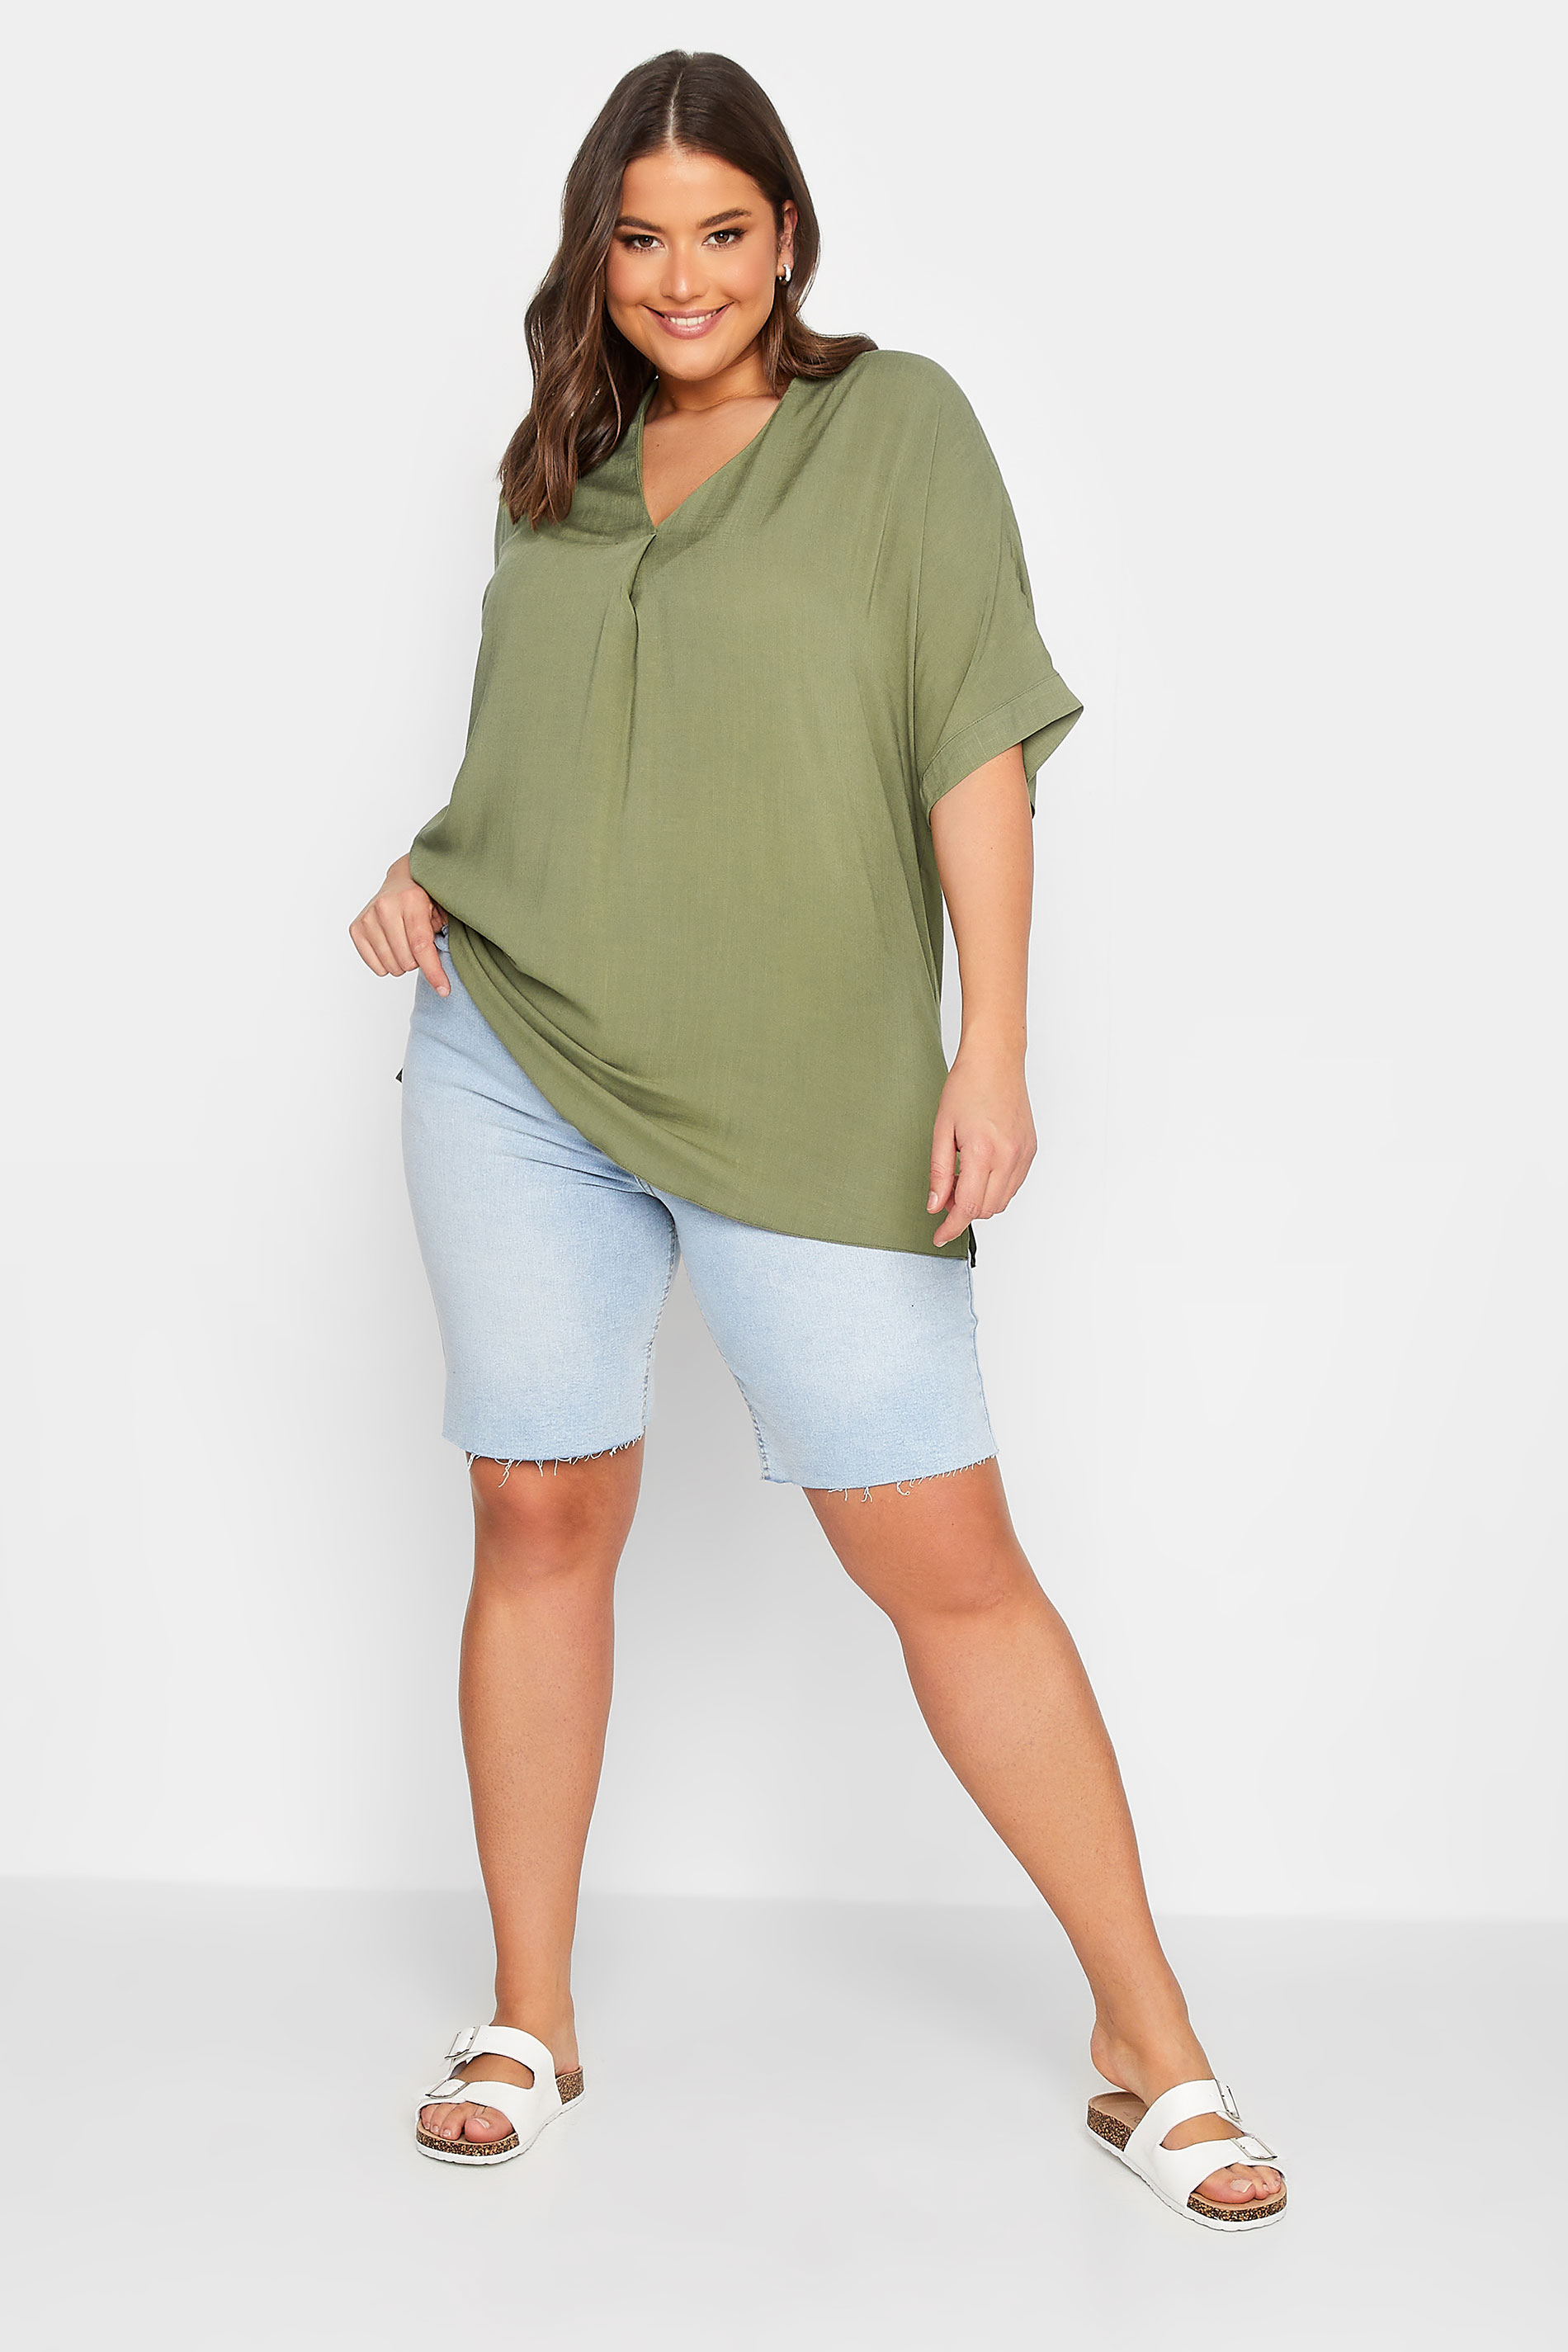 YOURS Curve Plus Size Khaki Green Marl V-Neck Top 2